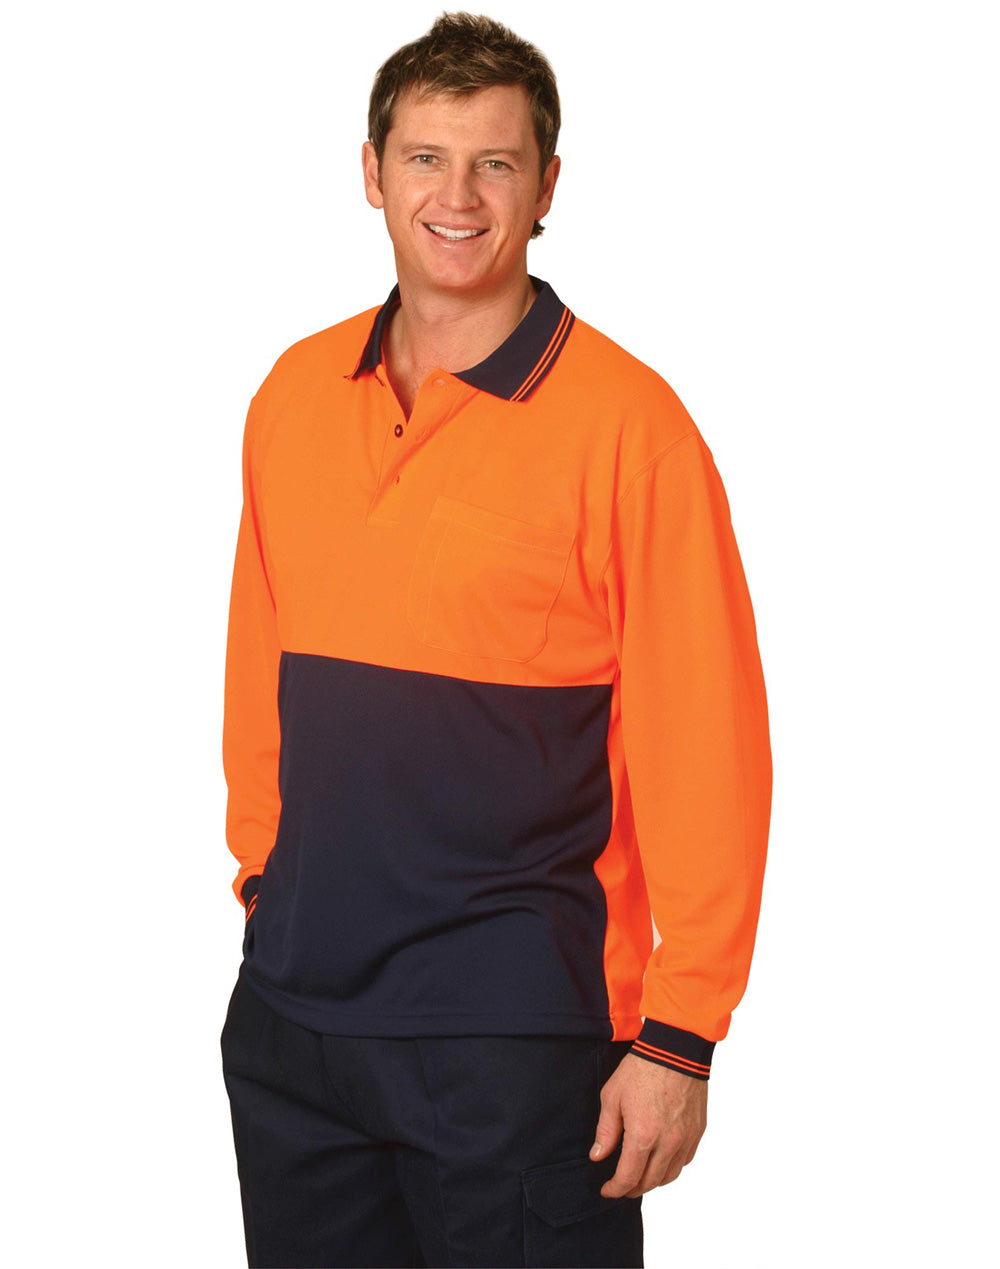 Winning Spirit-Hi Visibility Long Sleeve CoolDry Micro-mesh Safety Polo-SW05CD